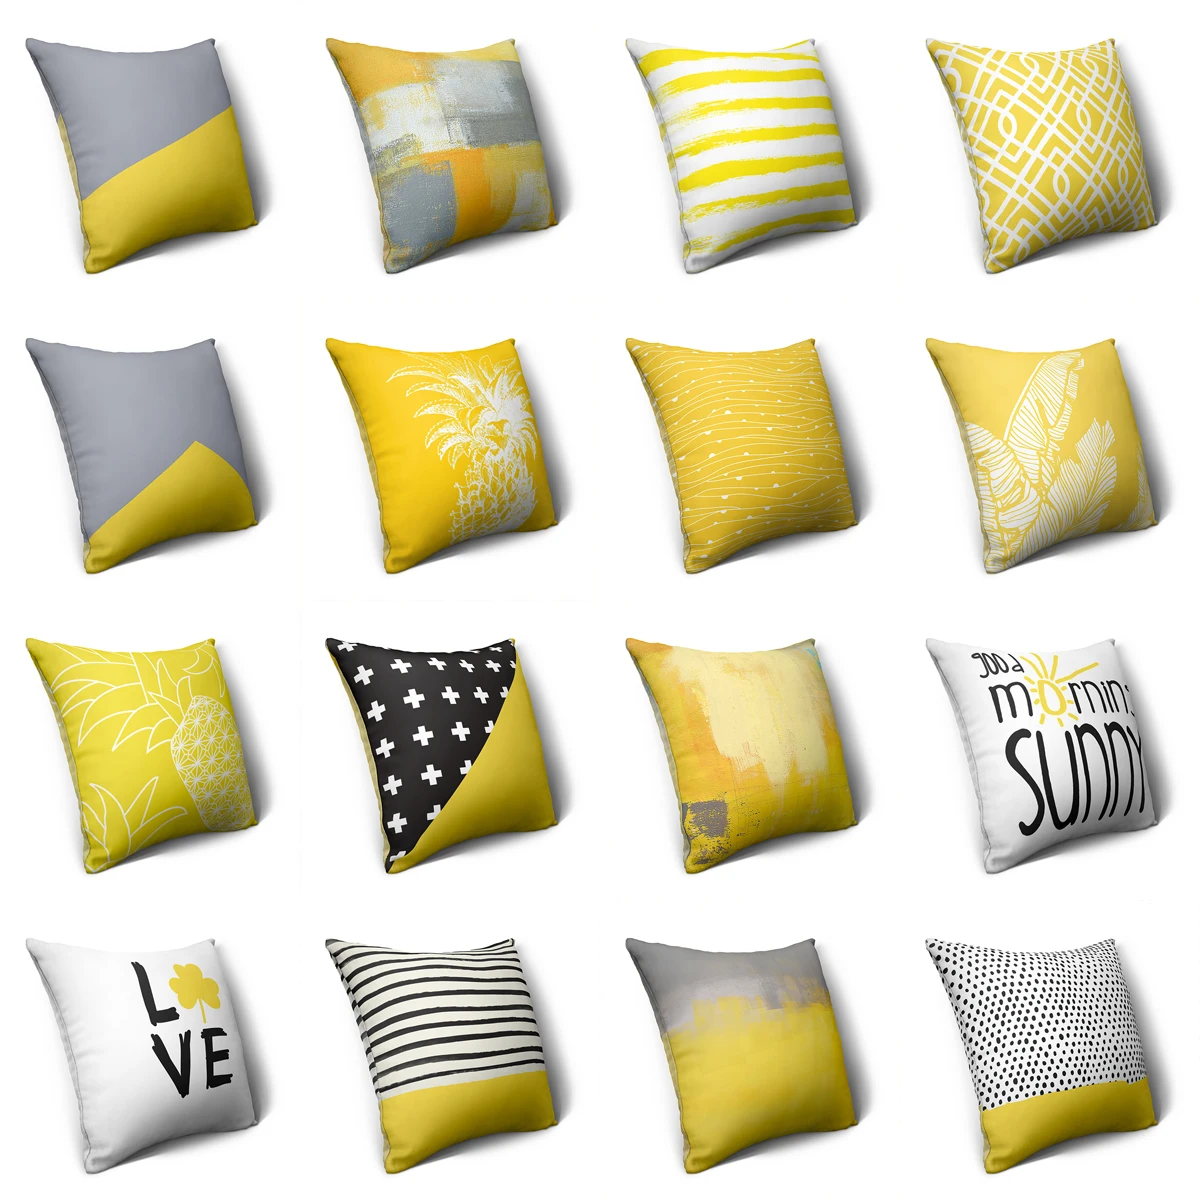 

ZHENHE Yellow Geometry Pillow Case Double Sided Printing Cushion Cover for Bedroom Sofa Balcony Decor 18x18 Inch（45x45cm）